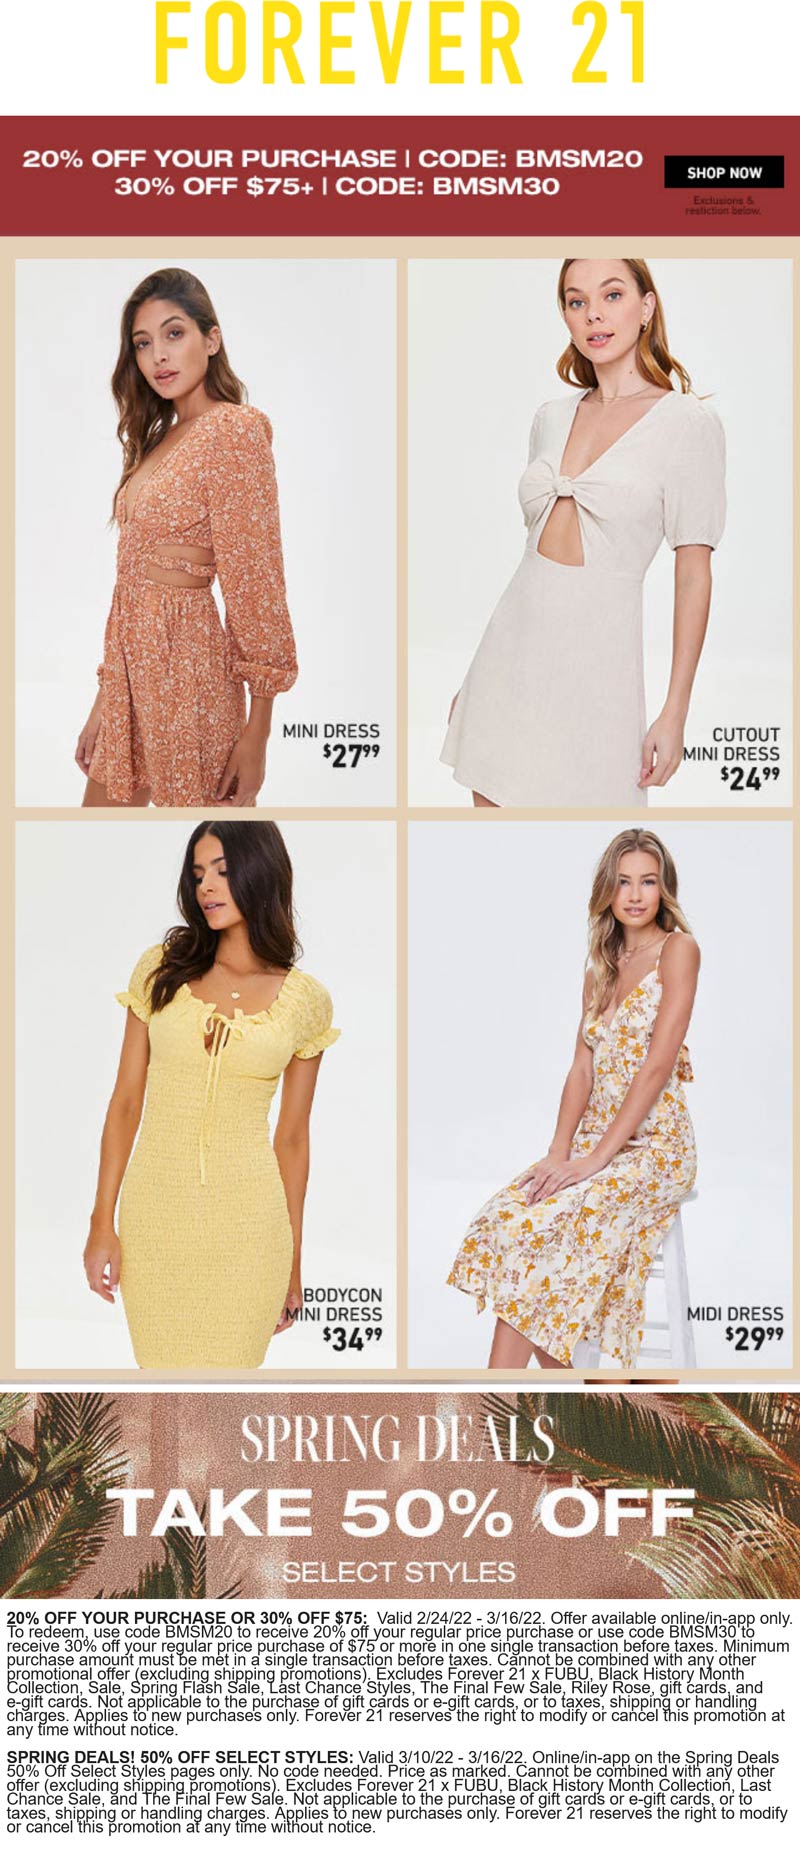 Forever 21 stores Coupon  20-30% off at Forever 21 via promo code BMSM20 & BMSM30 #forever21 